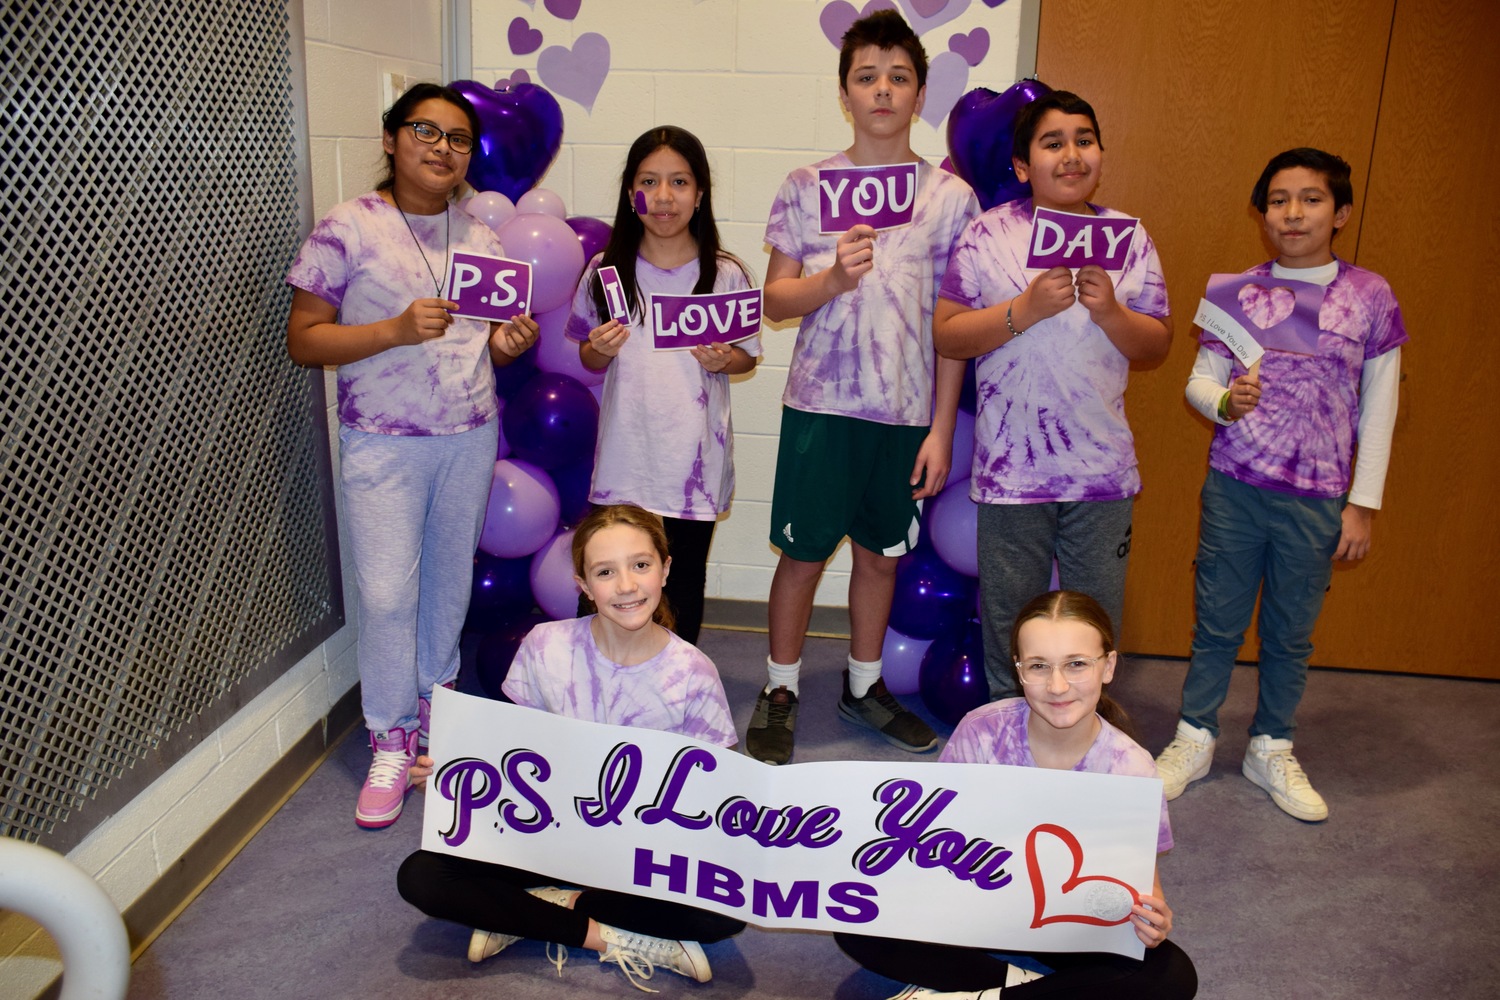 Hampton Bays Middle School students celebrated P.S. I Love You Day on Feb. 9 to raise awareness about bullying and suicide while promoting kindness. The students embraced the theme by showing kindness to their peers. They wrote positive messages on Post-it notes, created displays in their hallways and wore purple. They also formed a large heart for a group photo in the school’s gym. COURTESY HAMPTON BAYS SCHOOL DISTRICT